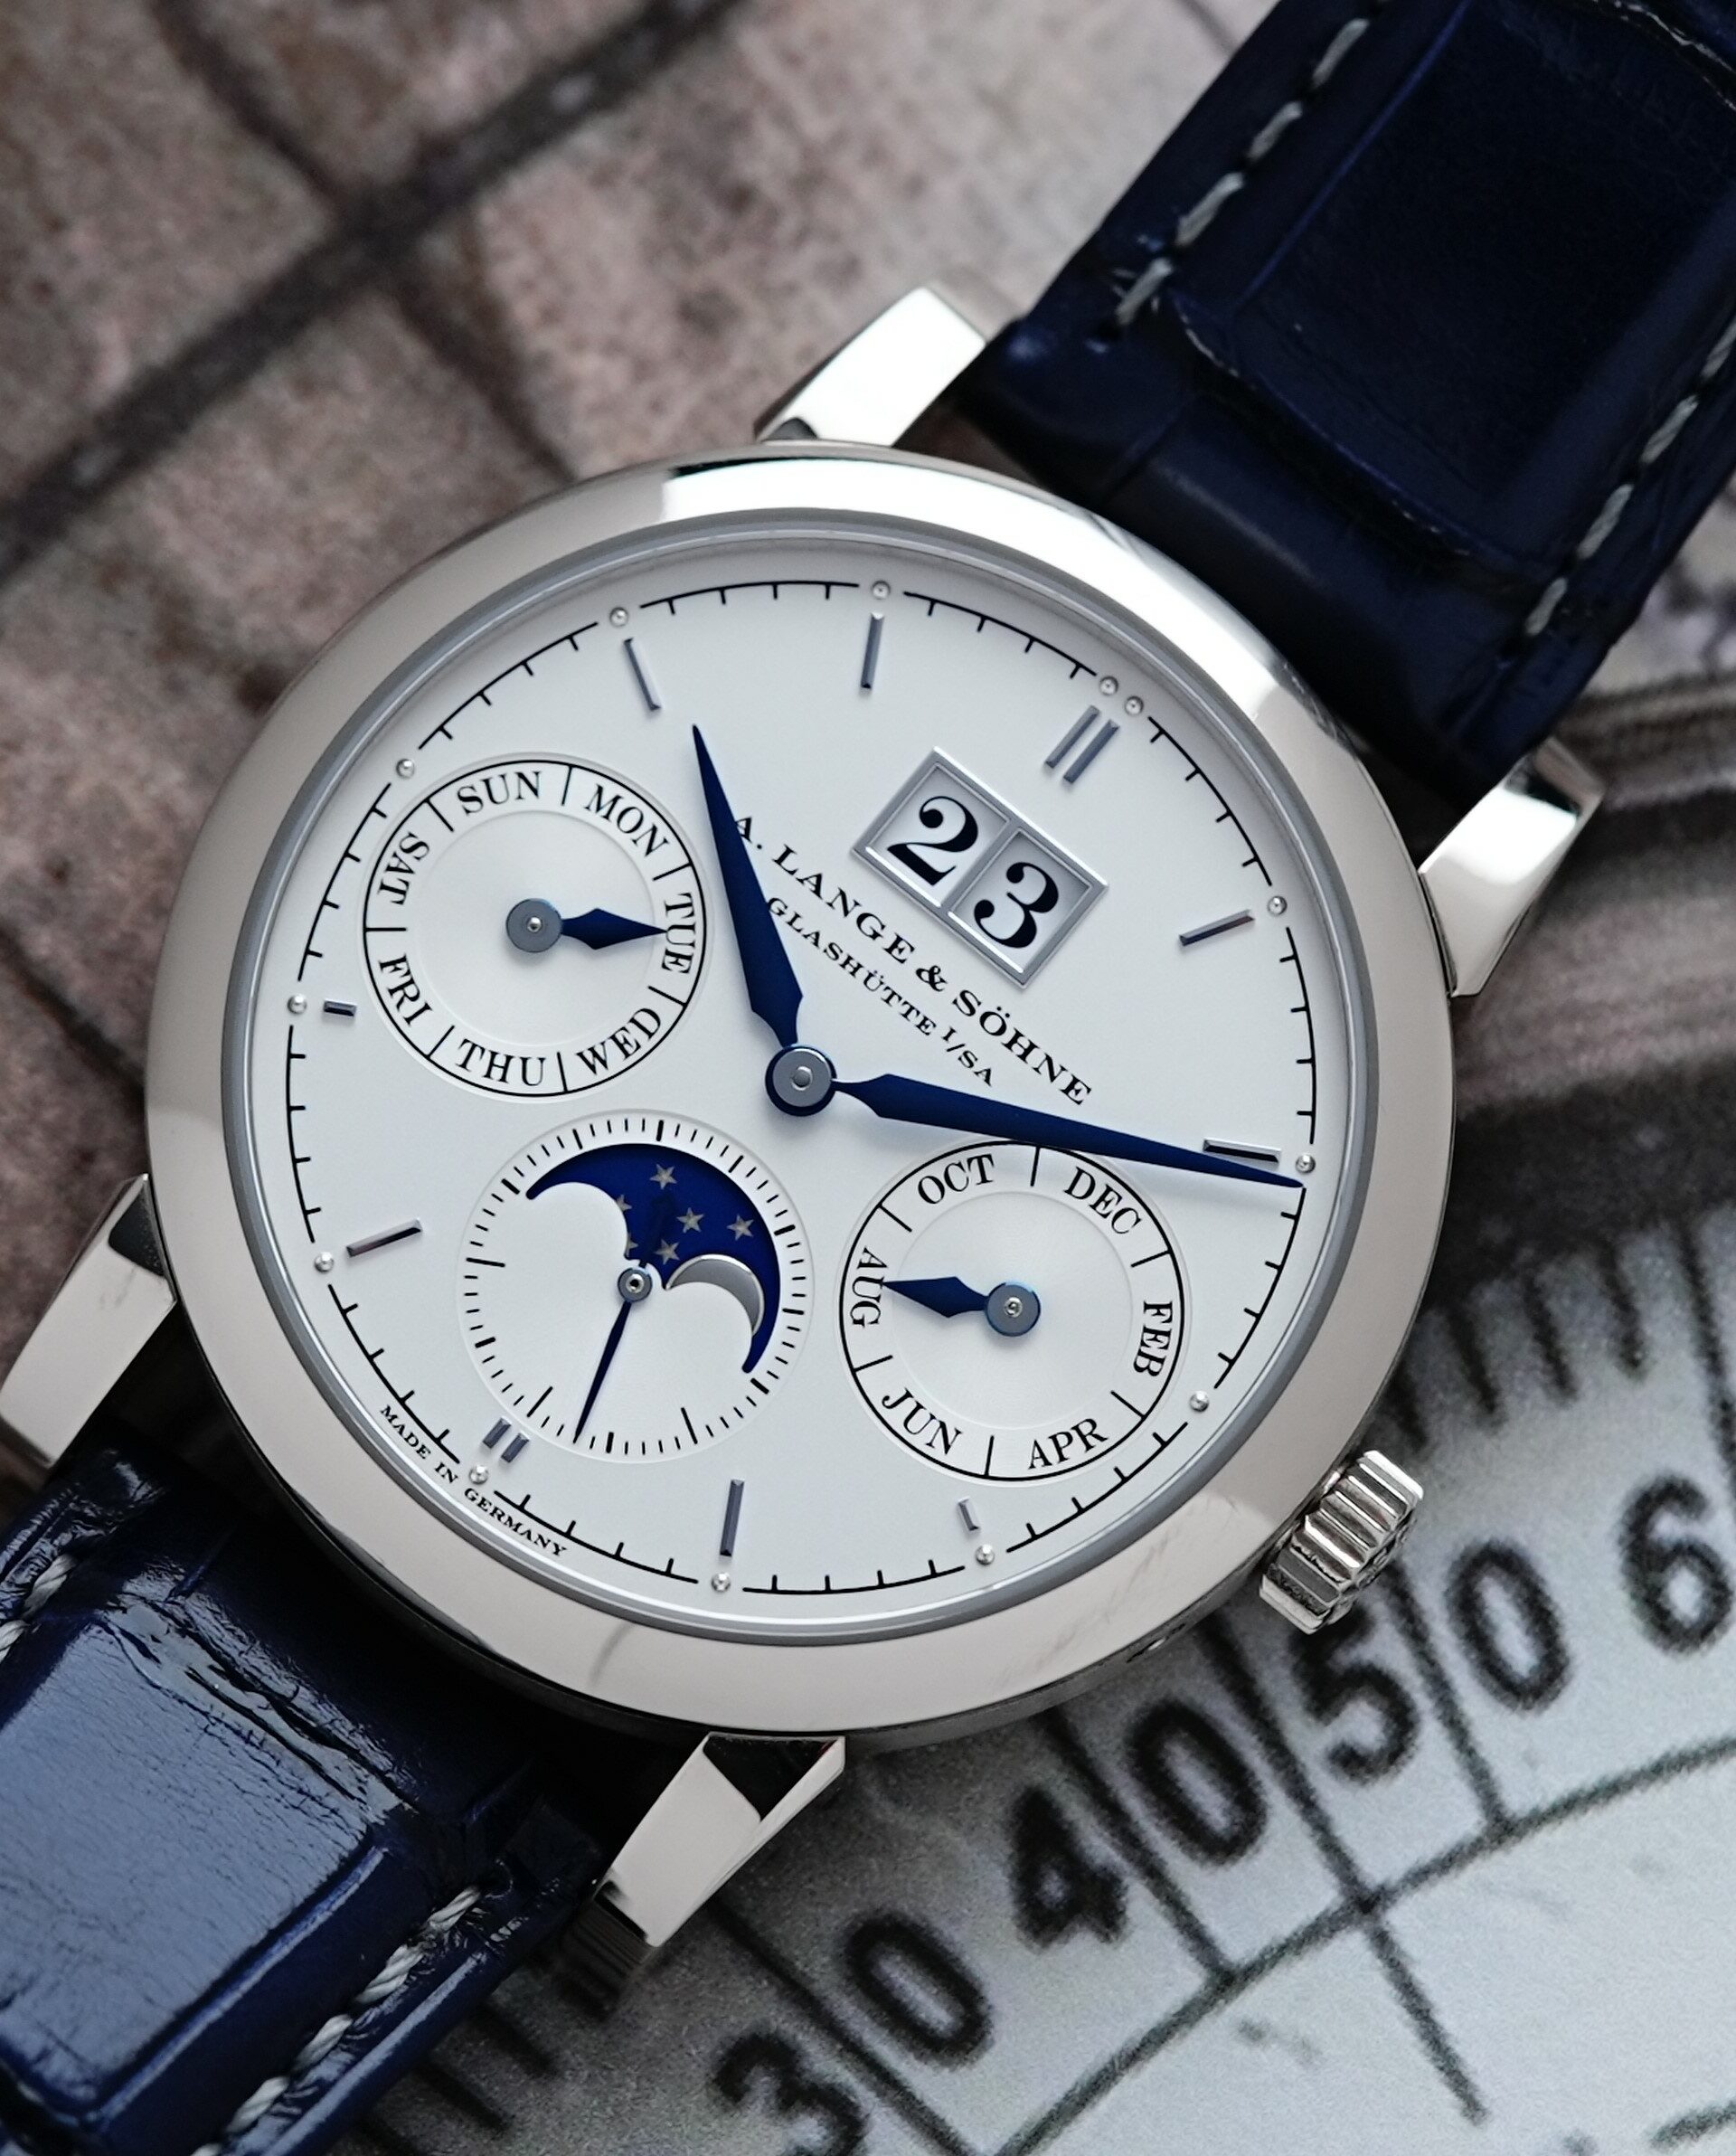 A. Lange & Söhne Saxonia Annual Calendar watch pictured with compass paper image in background.